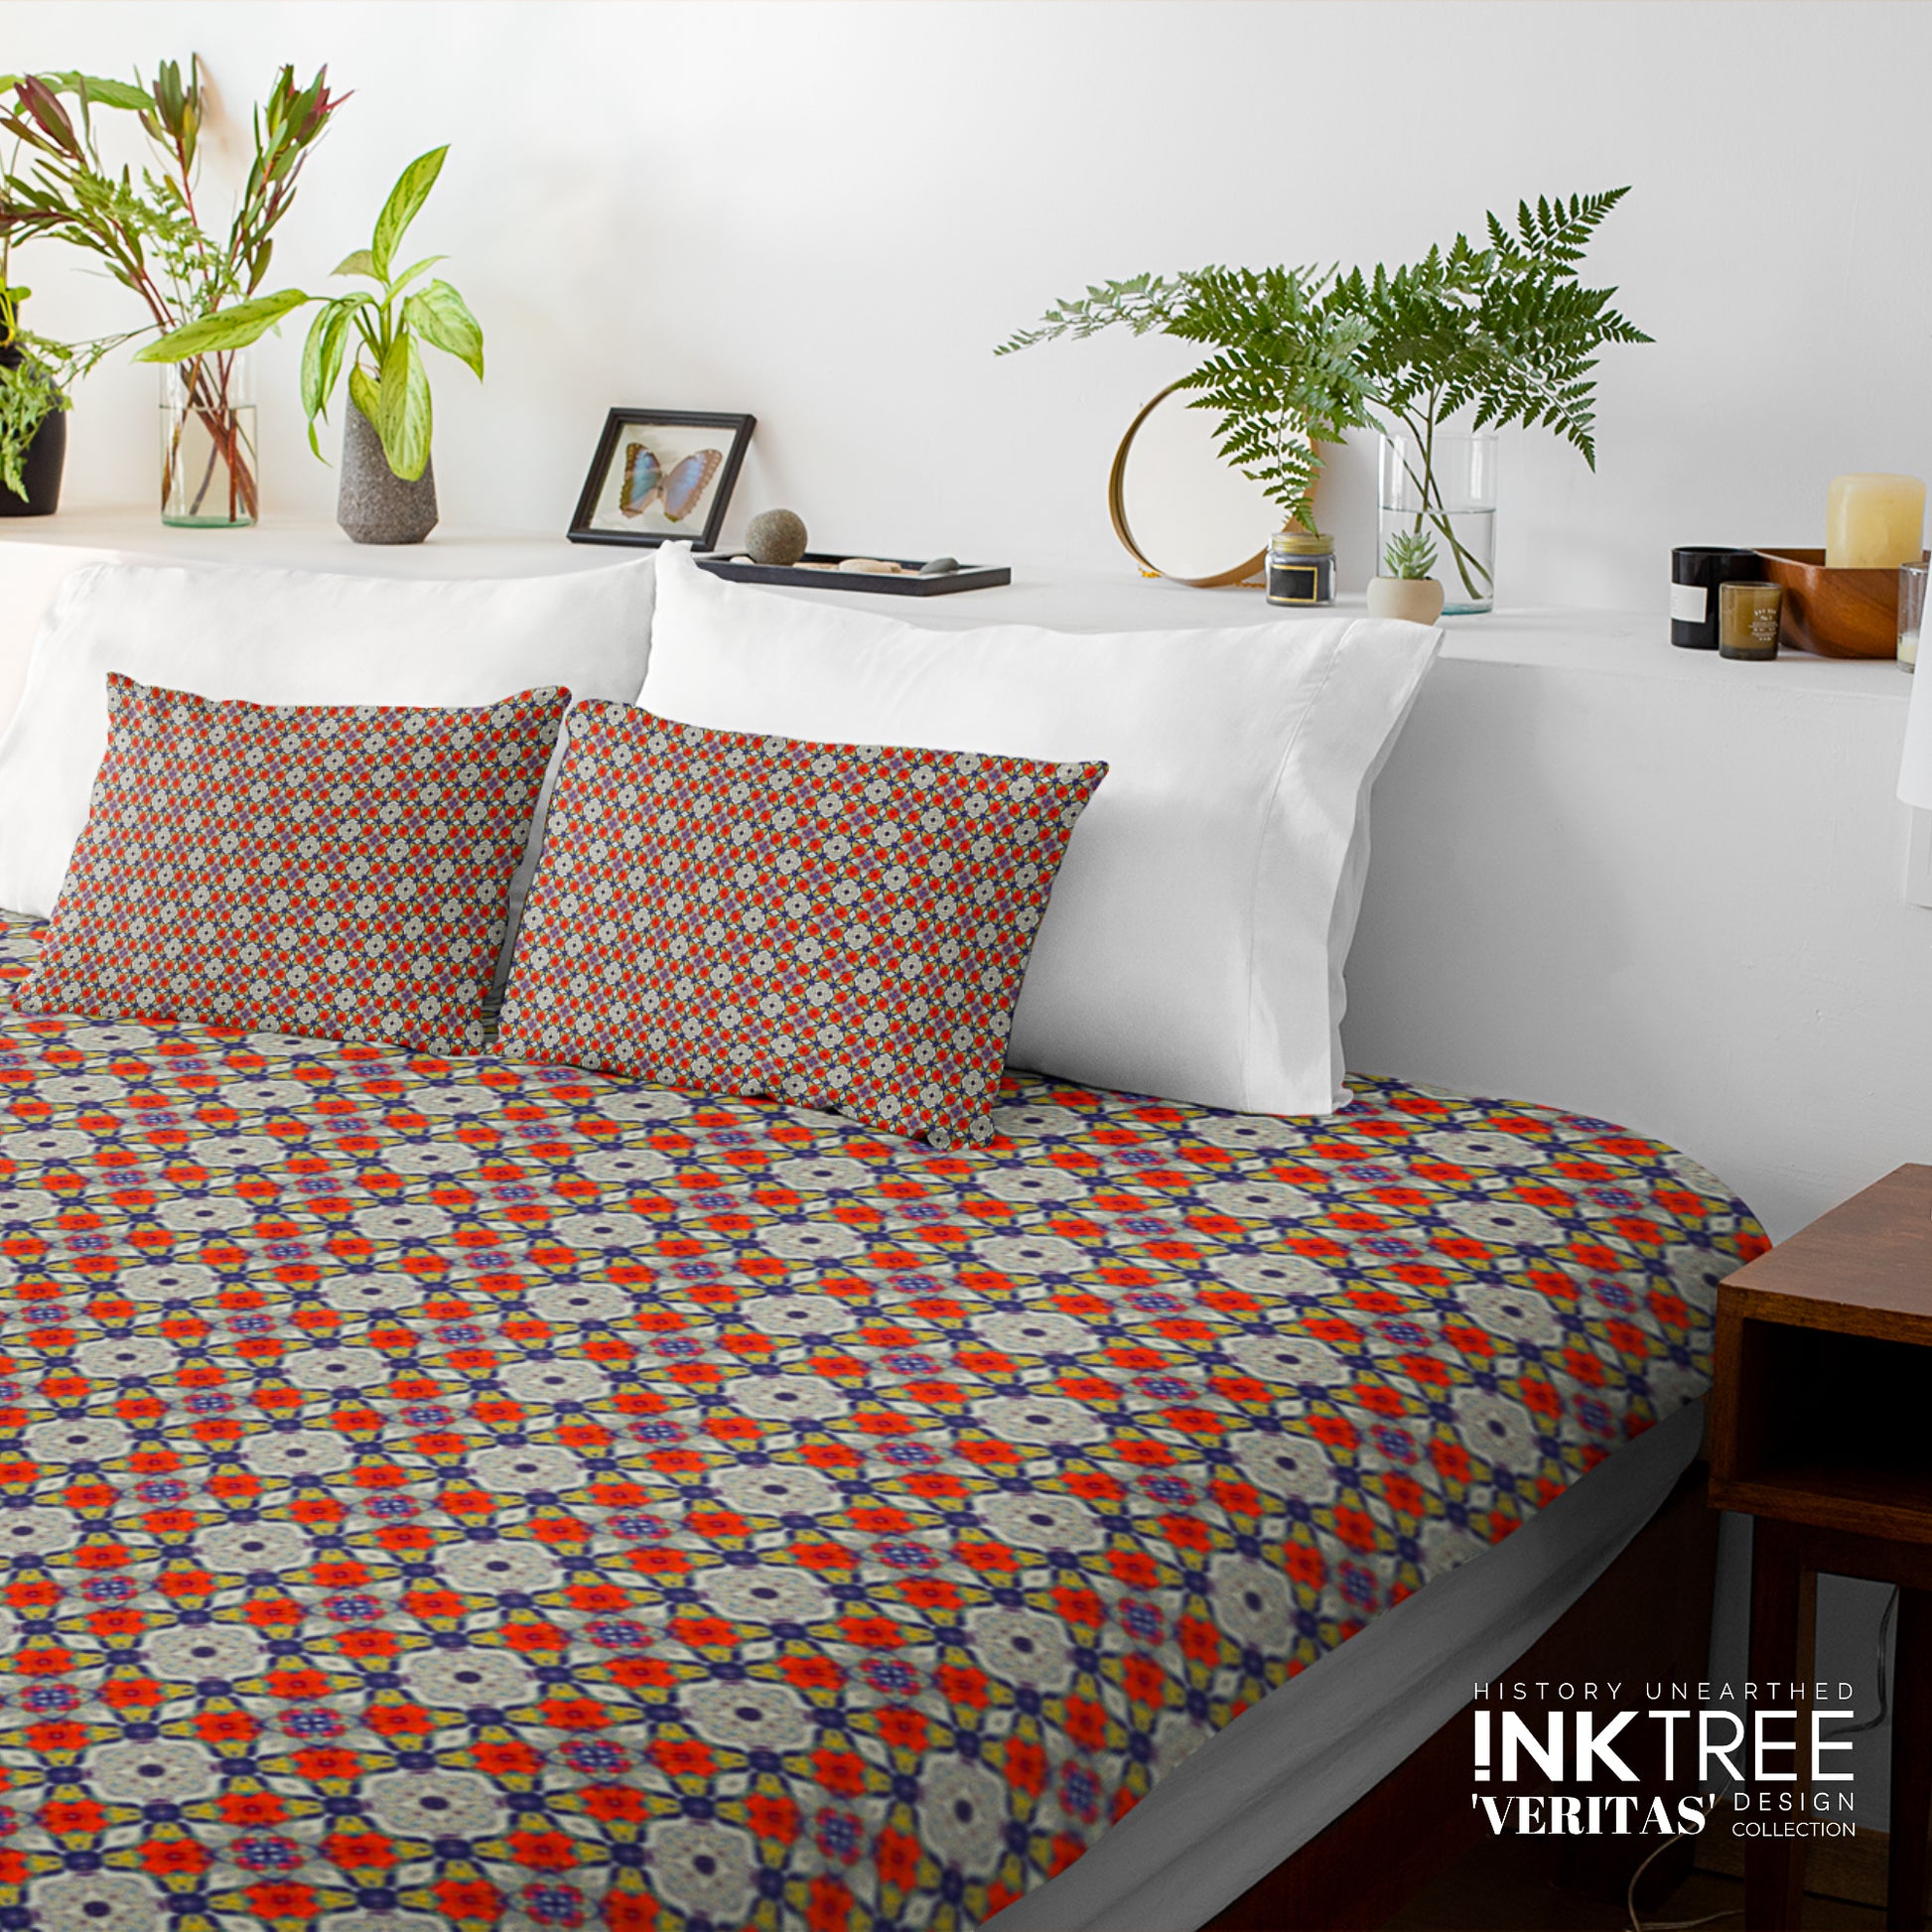 A doona cover and pillows with blue, grey and red floral pattern against a white wall, leaning against white pillows and green plants in vases.